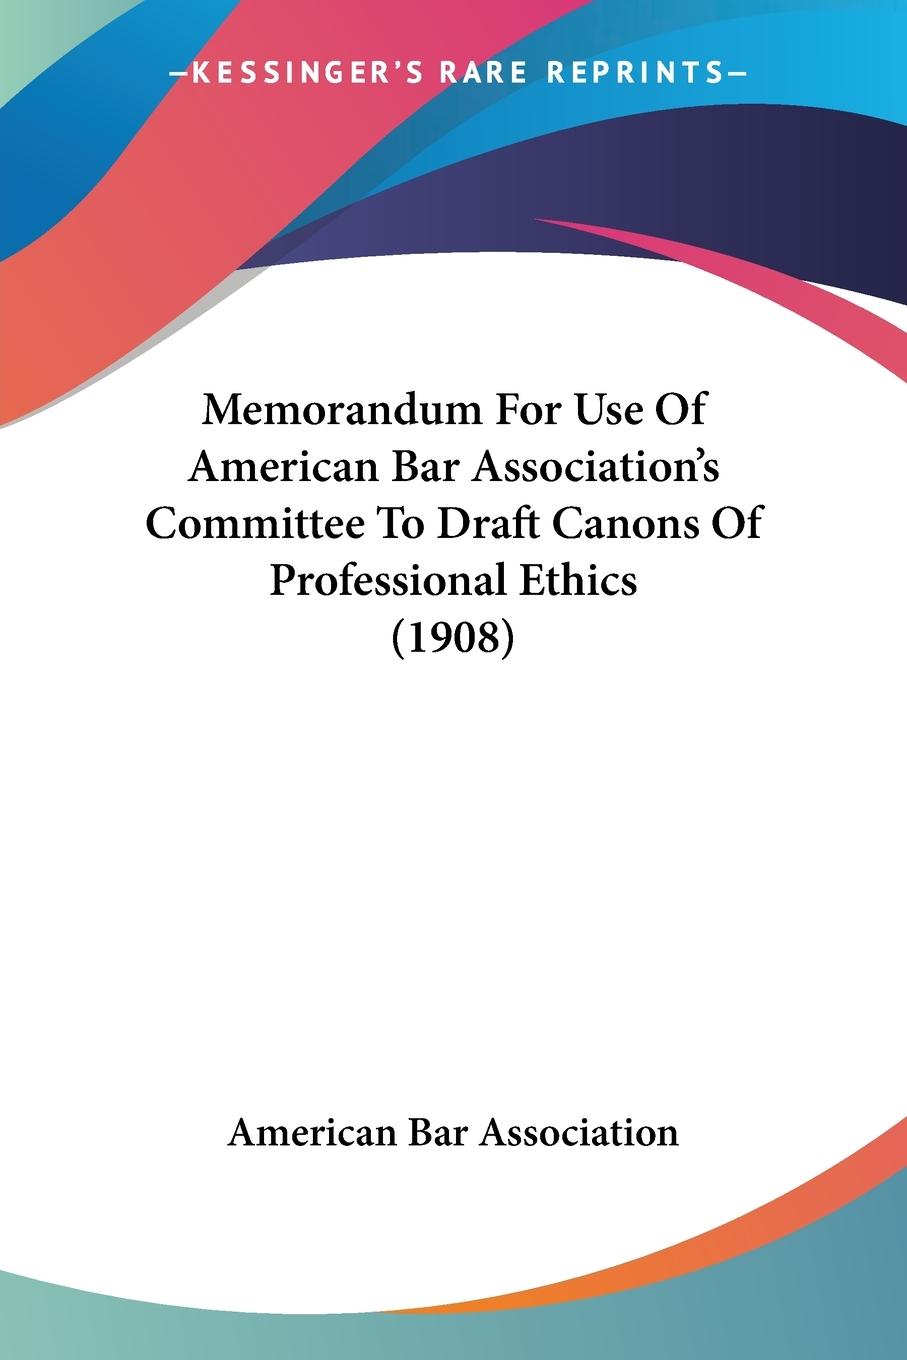 Memorandum For Use Of American Bar Association s Committee To Draft Canons Of Professional Ethics (1908) - American Bar Association